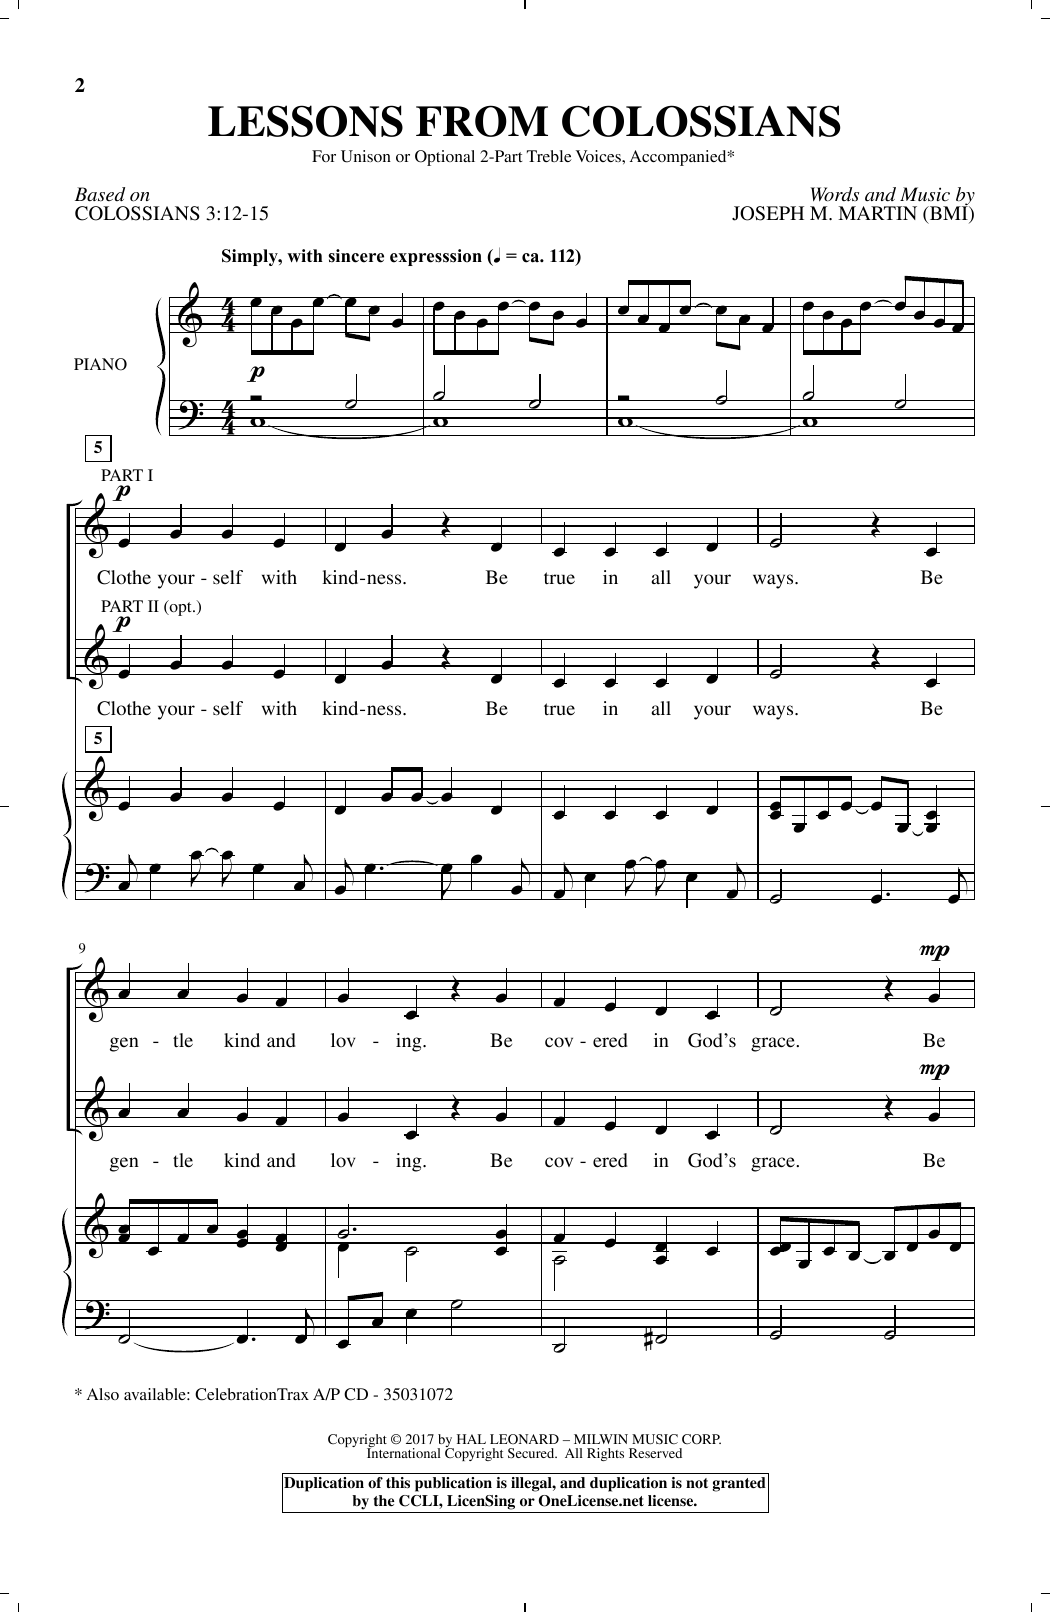 Download Joseph M. Martin Lessons From Colossians Sheet Music